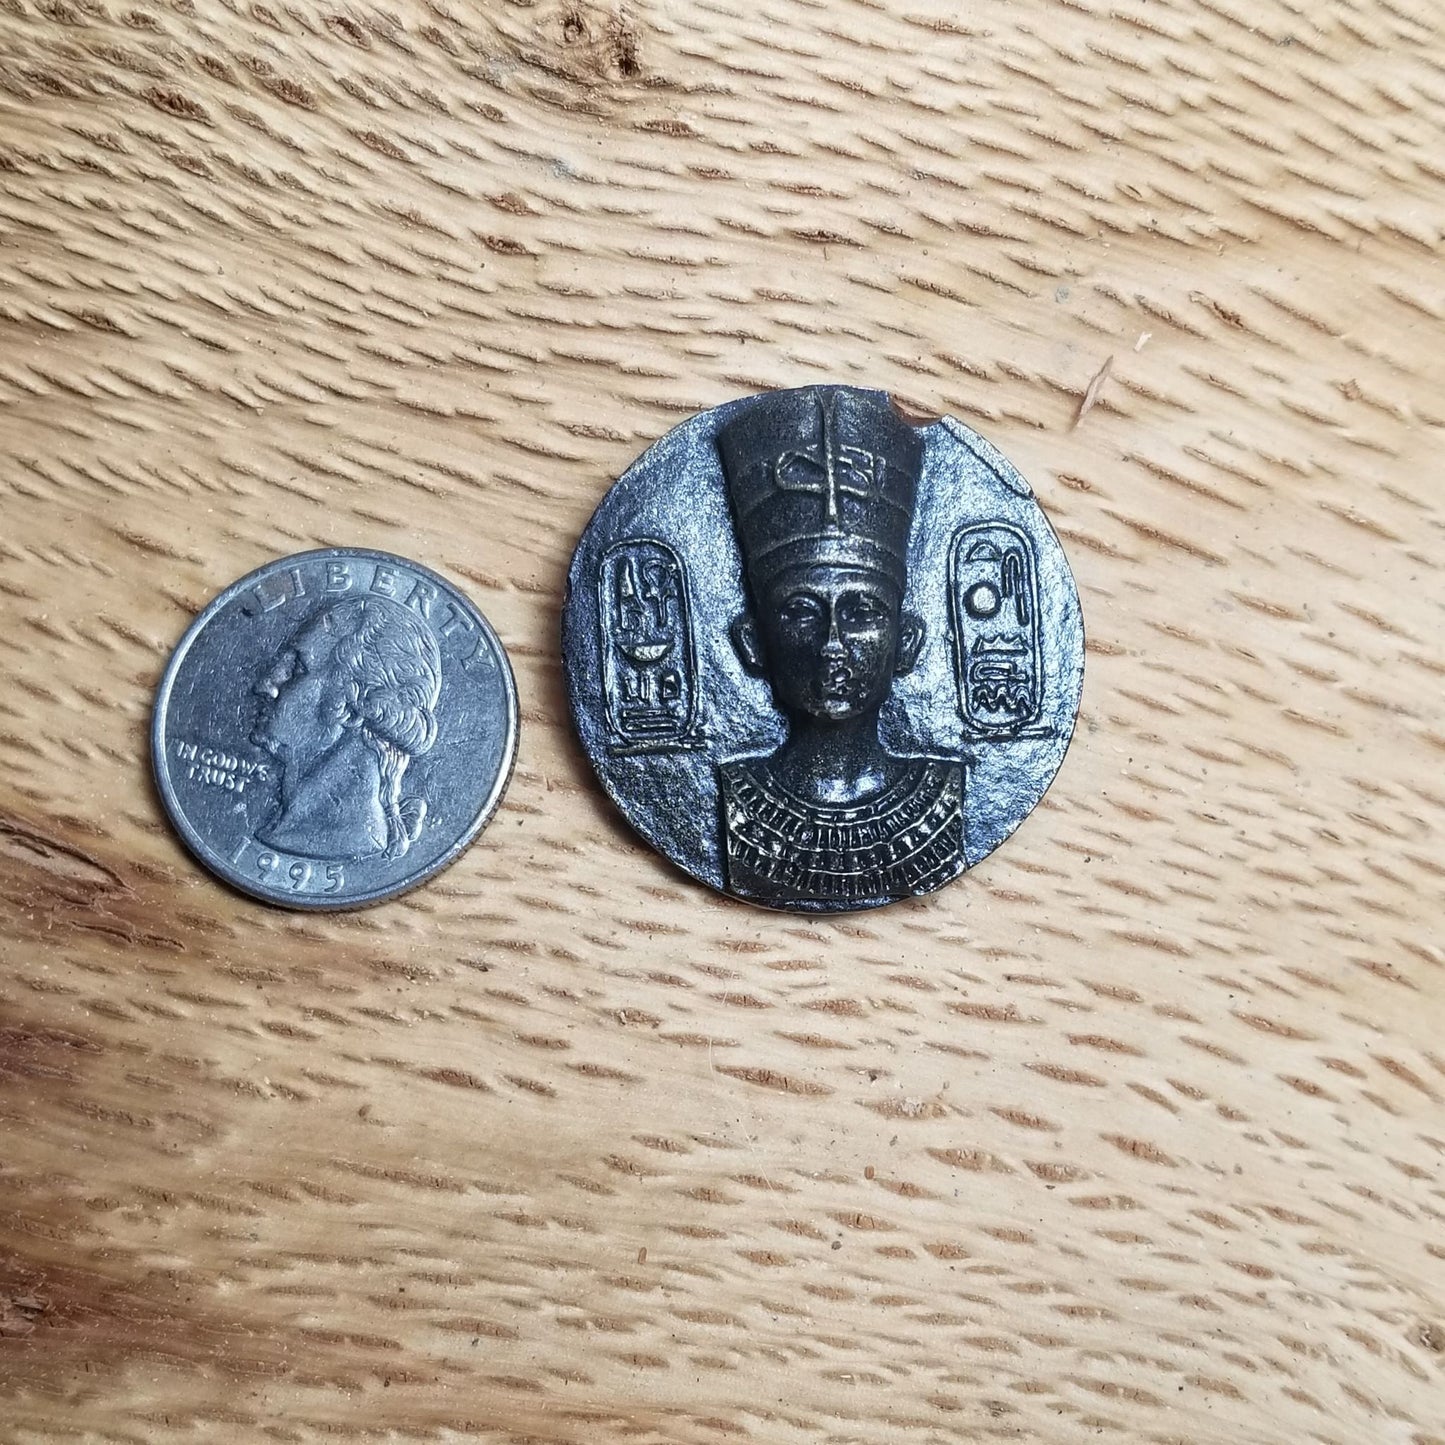 Egyptian Coin, Queen Nefertiti, Black and Gold